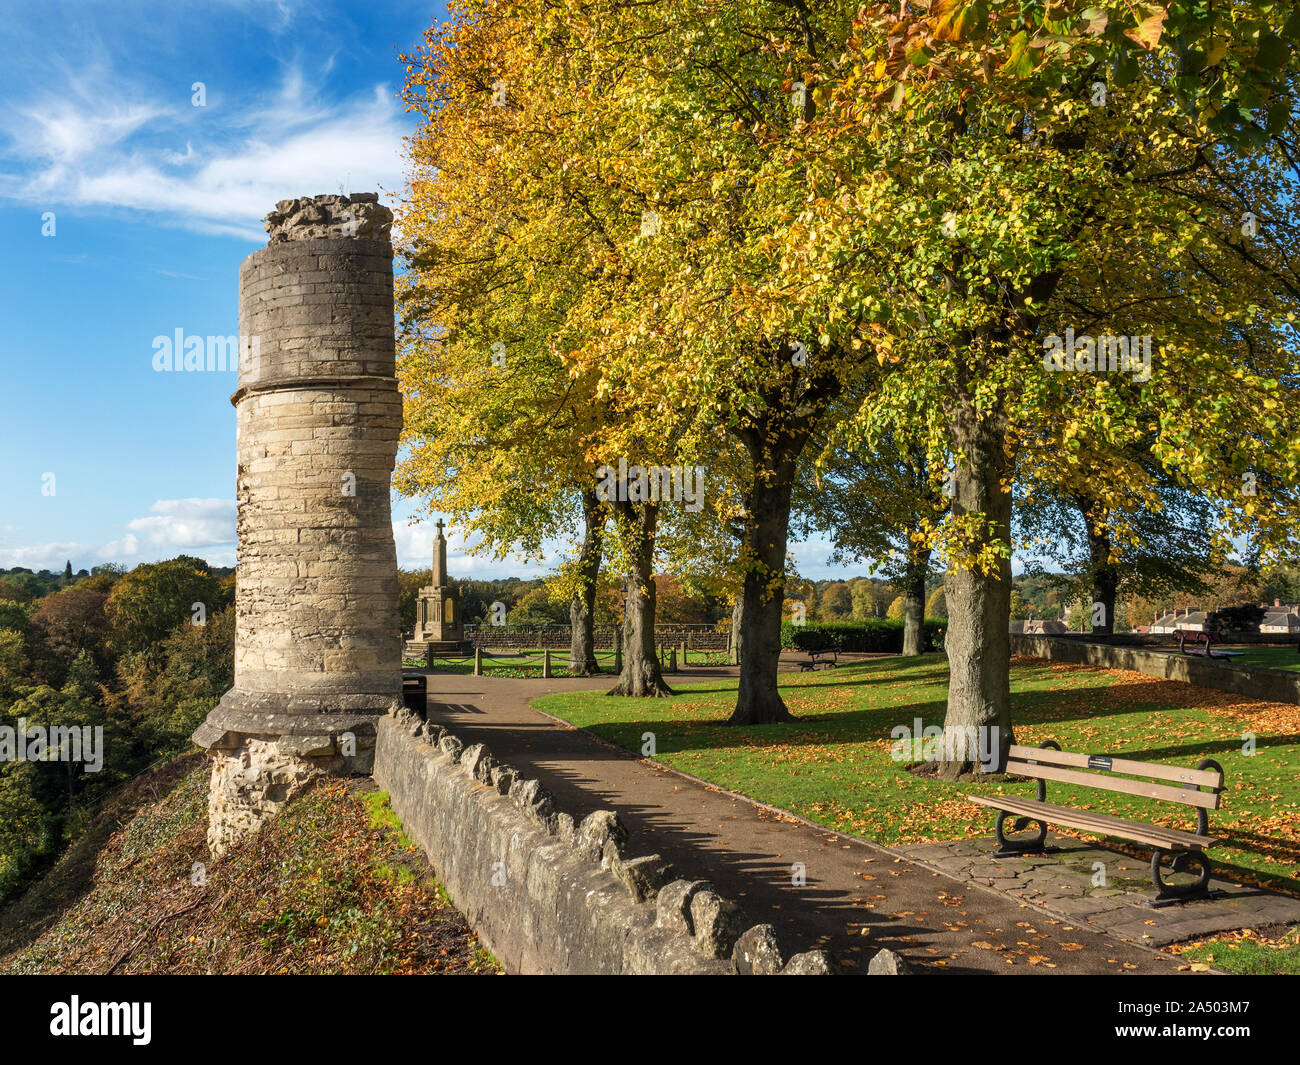 Ruined tower in the Castle Grounds at Knaresborough North Yorkshire England Stock Photo